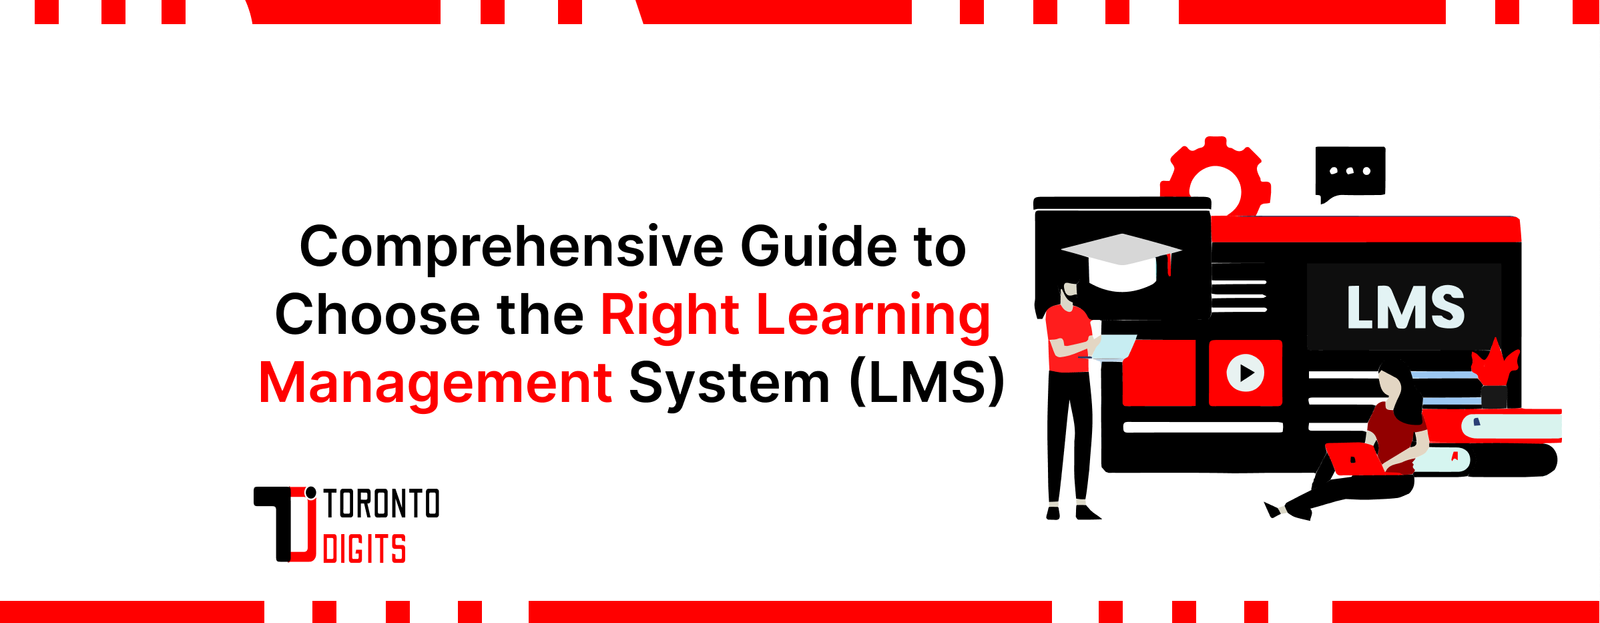 Comprehensive Guide to Choose the Right Learning Management System (LMS)